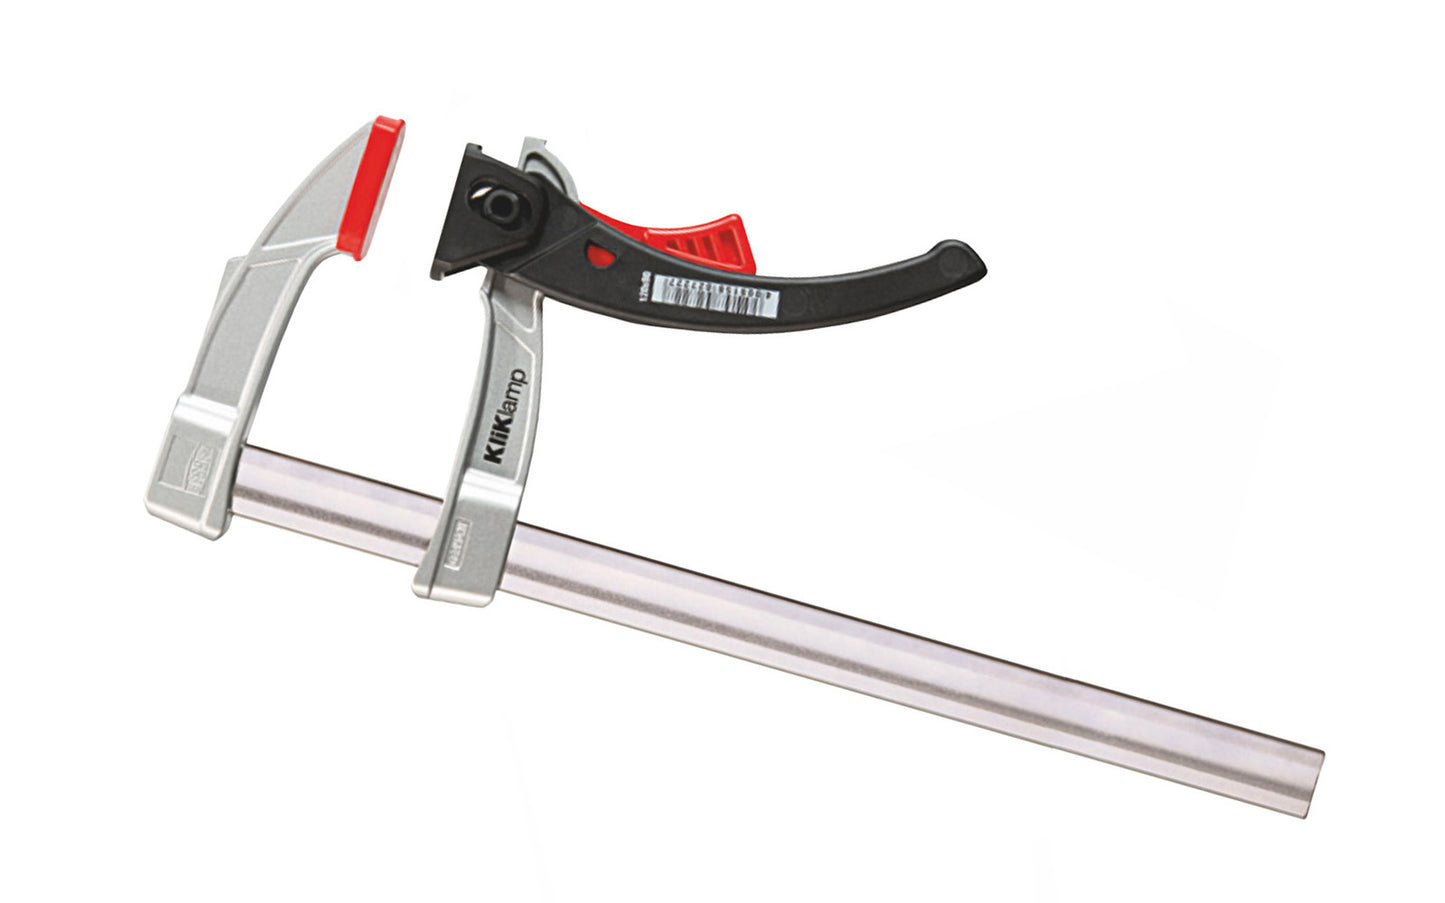 Bessey 12" KliKlamp Light Duty Lever Clamp KLI3.012 creates up to 260 lbs. of clamping force. Positive locking ratchet action. Made of sturdy magnesium which makes it lightweight & strong. Fixed arm with v-grooves holds round & angular components firmly in place. 12" clamping capacity - 3" throat depth. Made in Germany